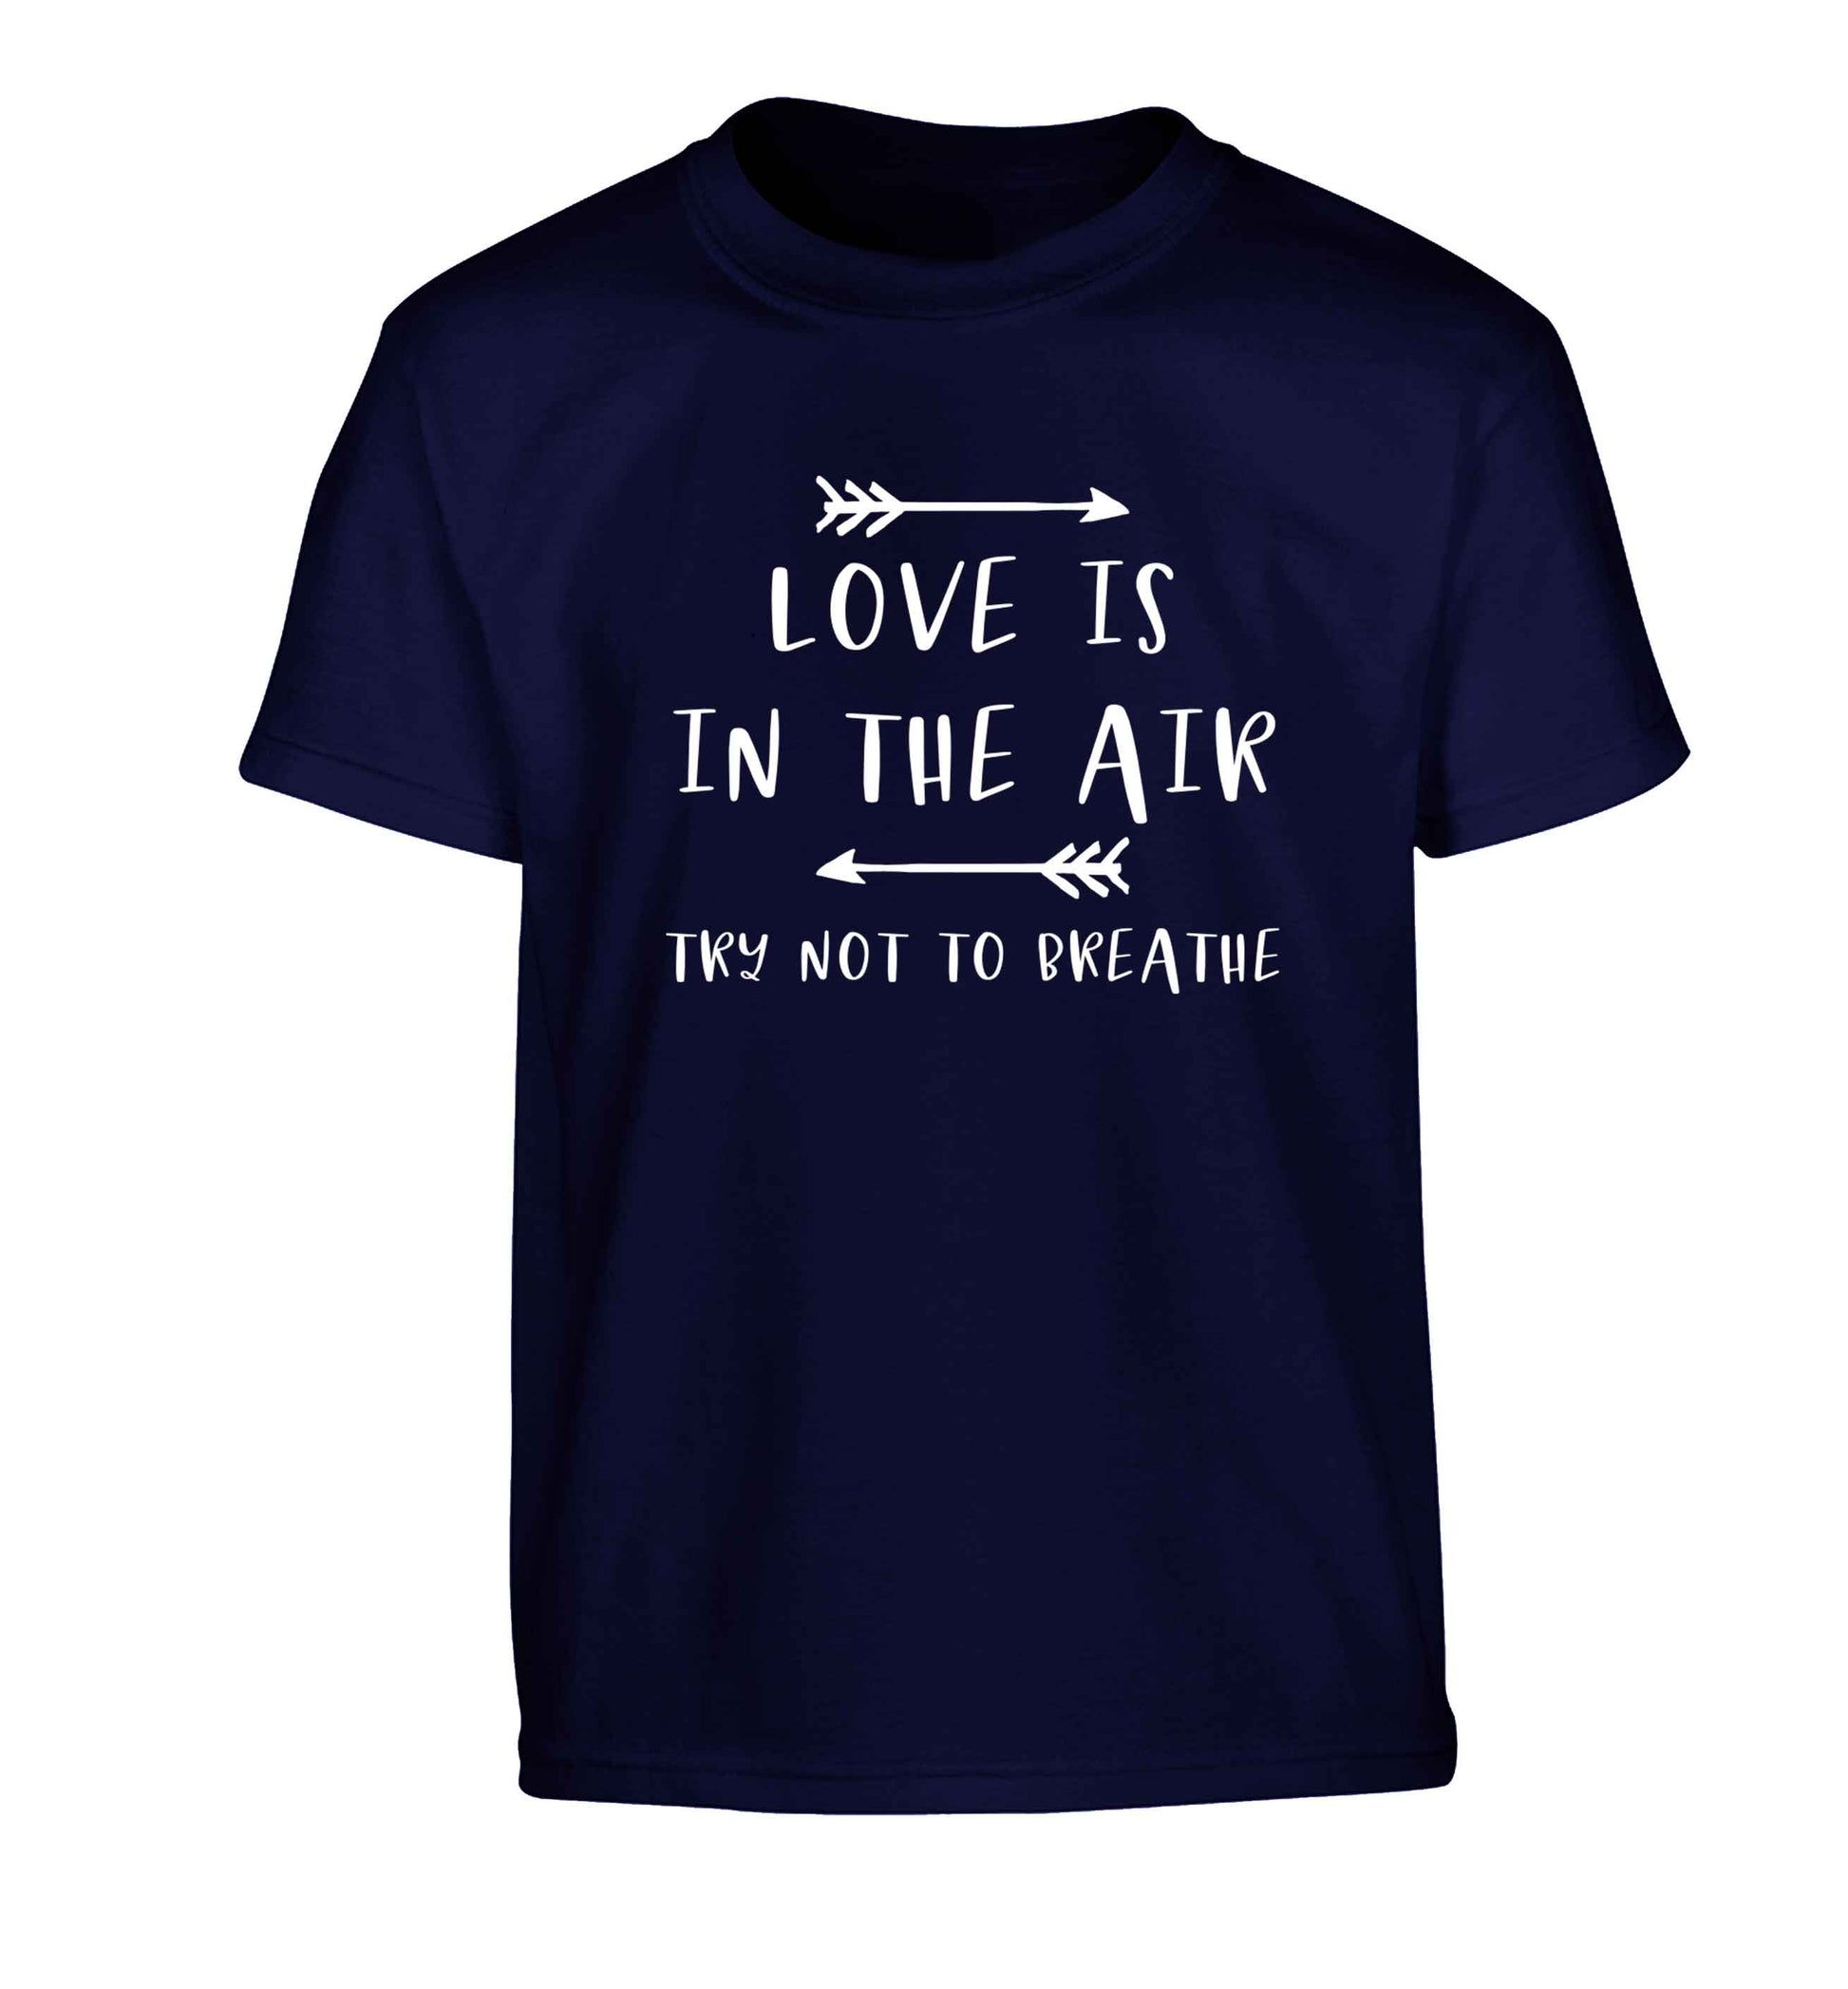 Love is in the air try not to breathe Children's navy Tshirt 12-13 Years